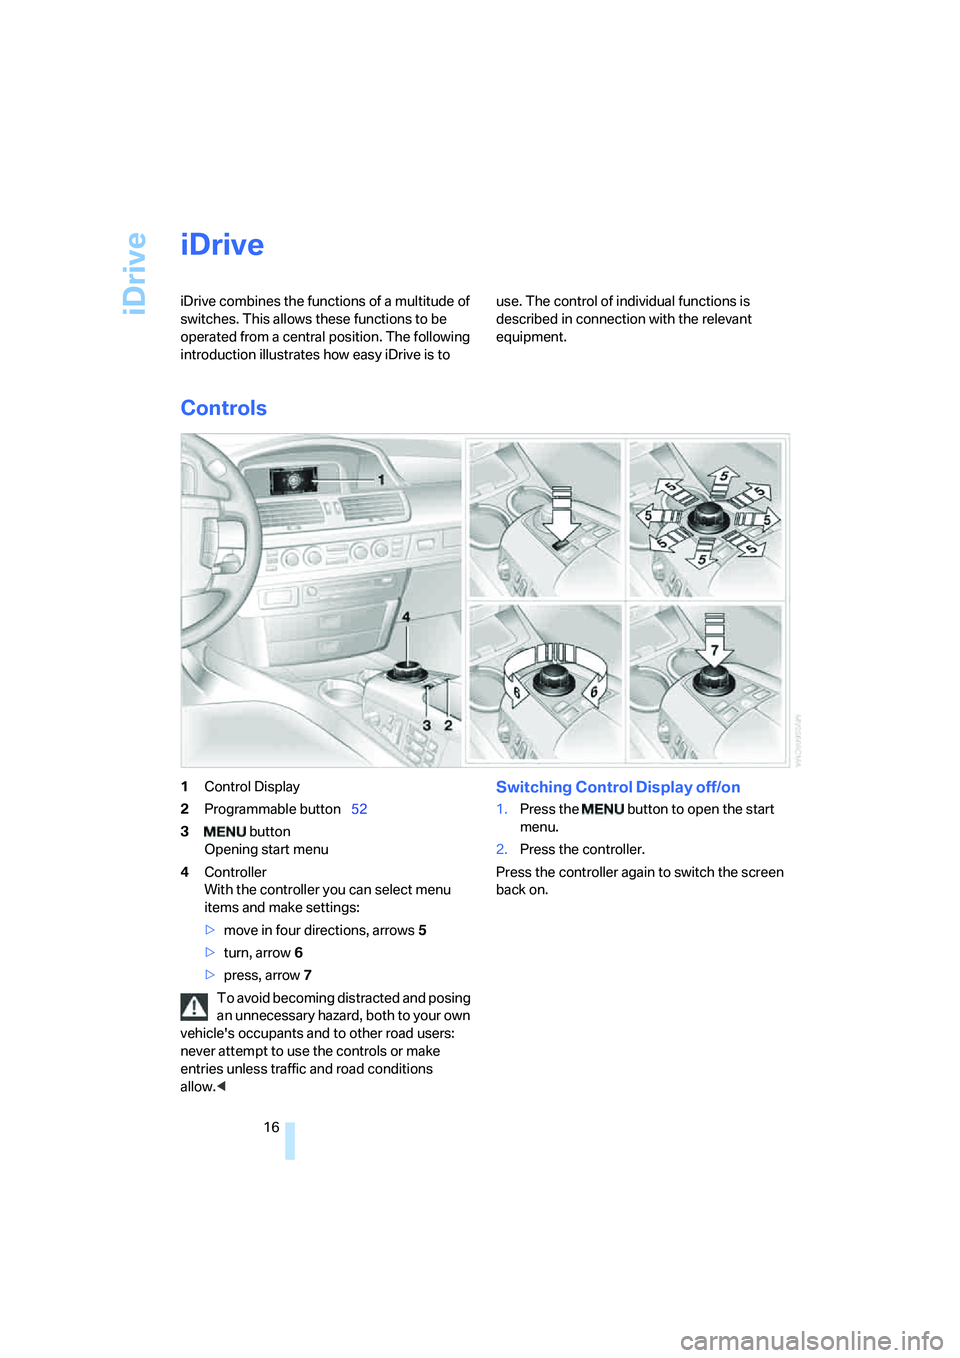 BMW 760LI 2006  Owners Manual iDrive
16
iDrive
iDrive combines the functions of a multitude of 
switches. This allows these functions to be 
operated from a central position. The following 
introduction illustrates how easy iDrive